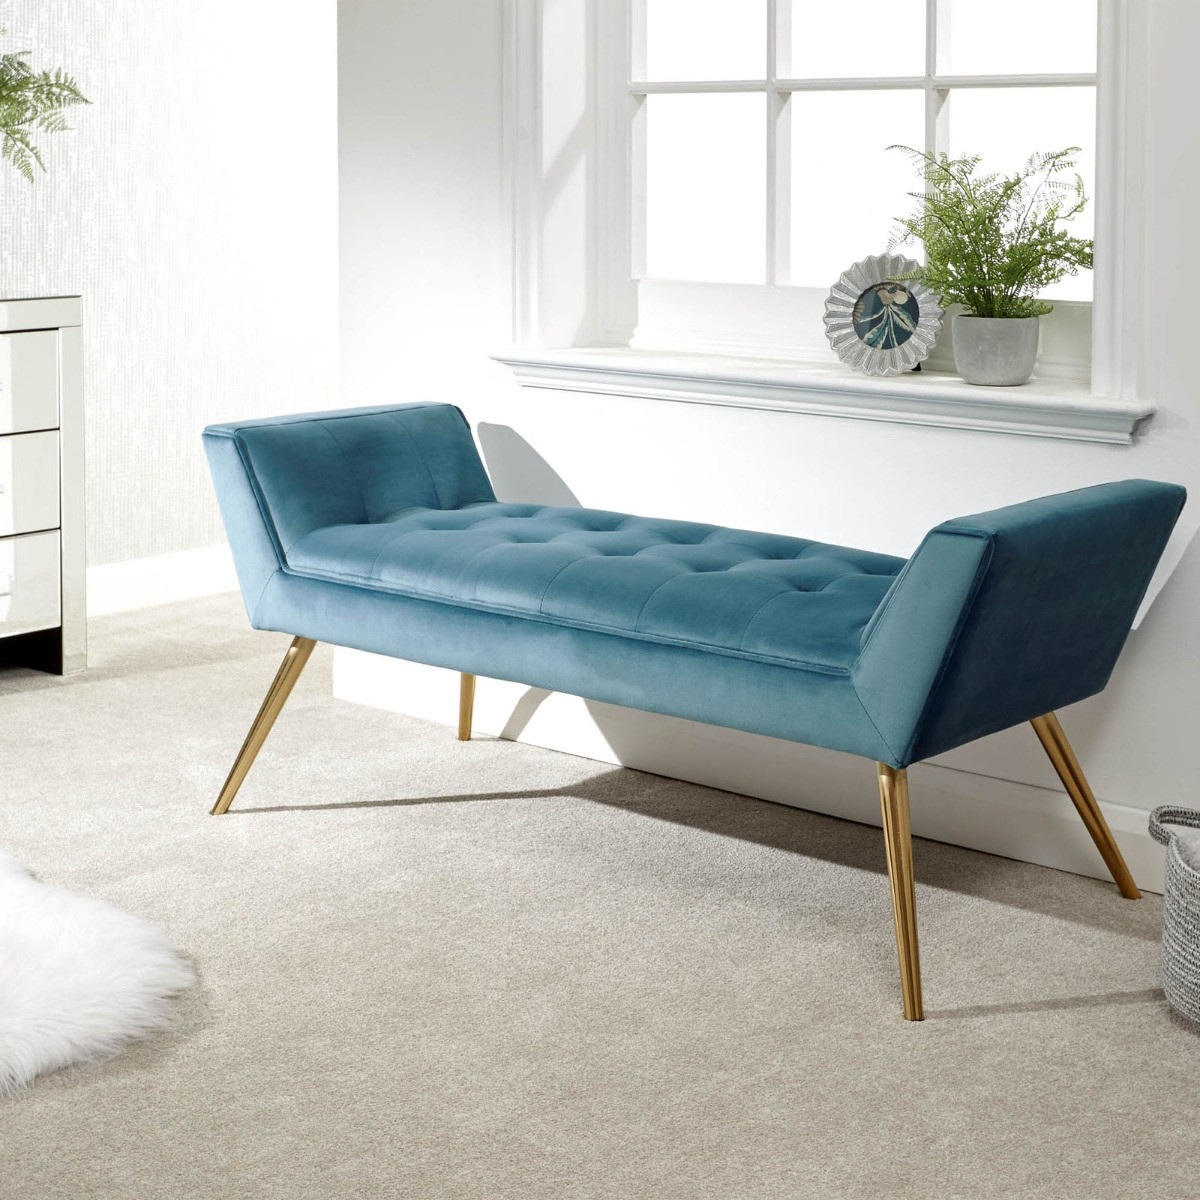 Turin Upholstered Window Seat - Teal>